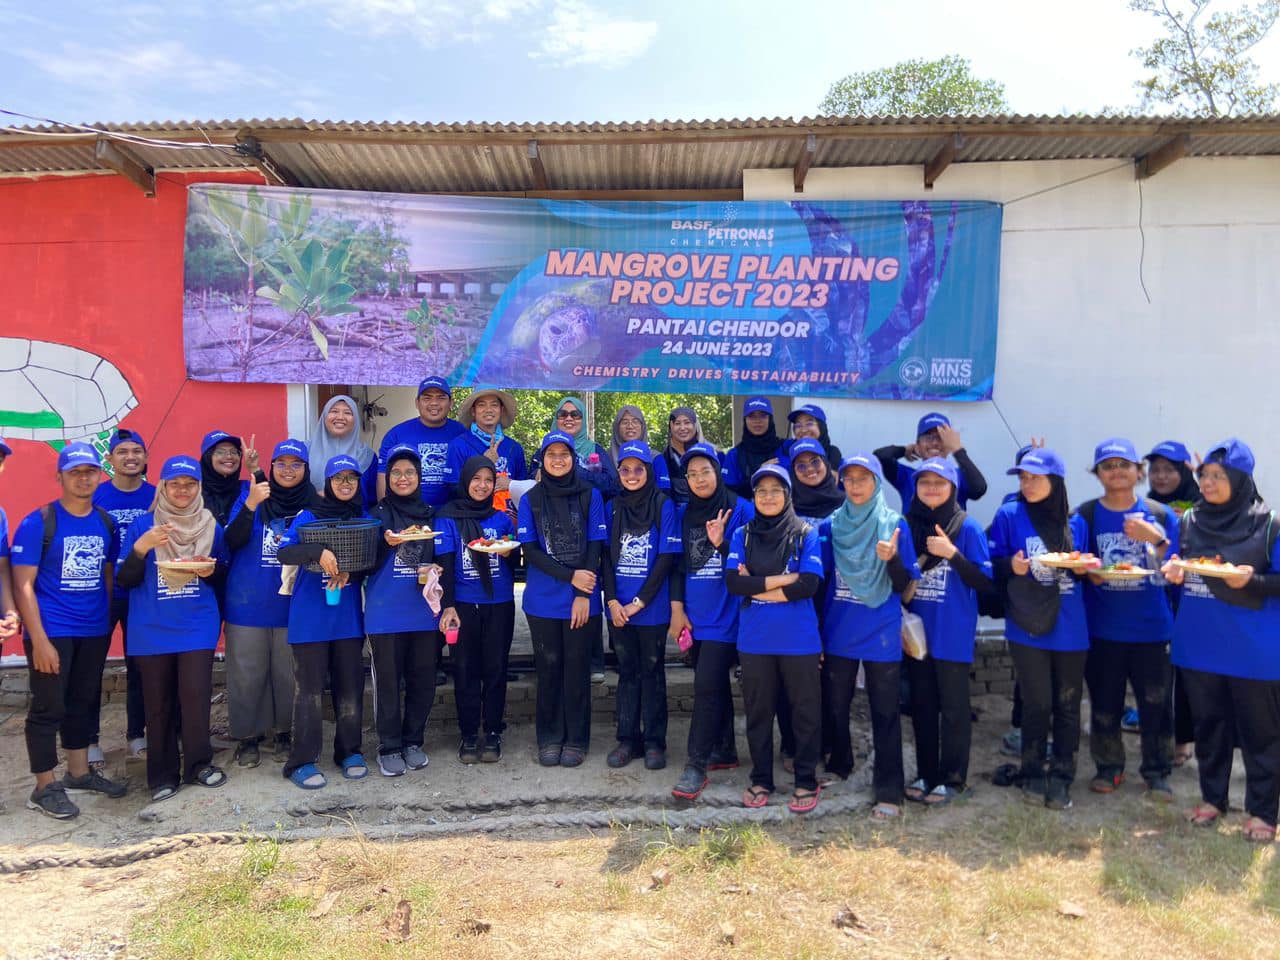 FTKKP STAFF AND STUDENTS VOLUNTEER AT BASF PETRONAS CHEMICALS MANGROVE PLANTING PROJECT 2023